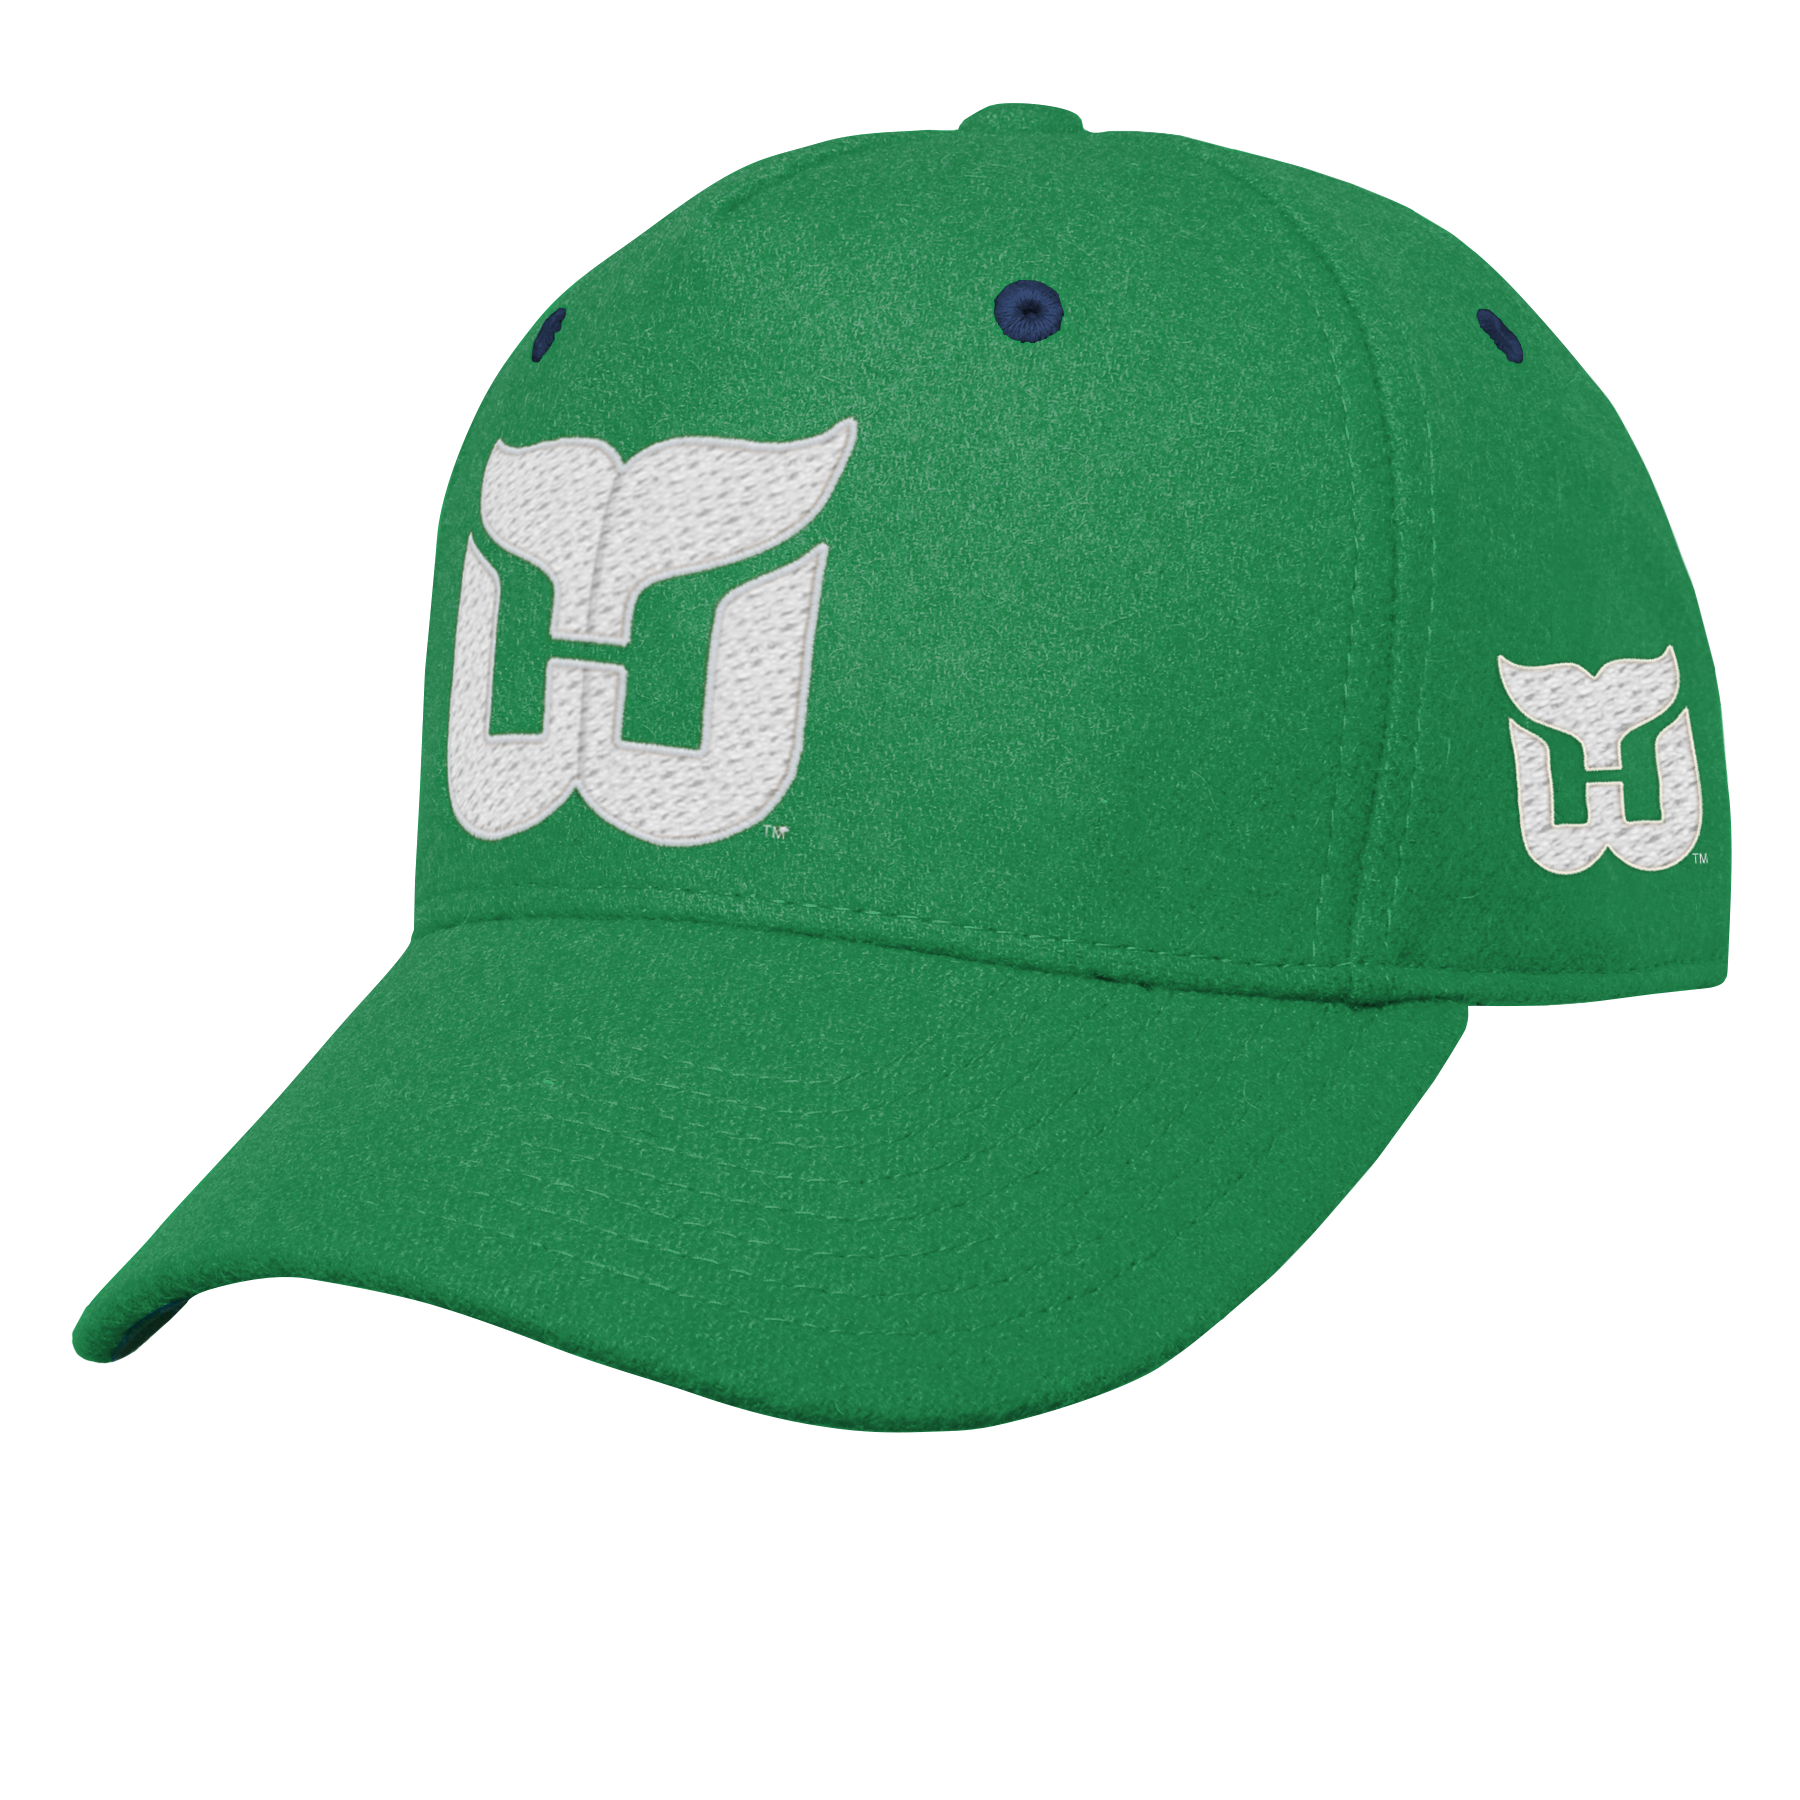 Outerstuff Precurved Snapback Hat - Dallas Stars - Youth